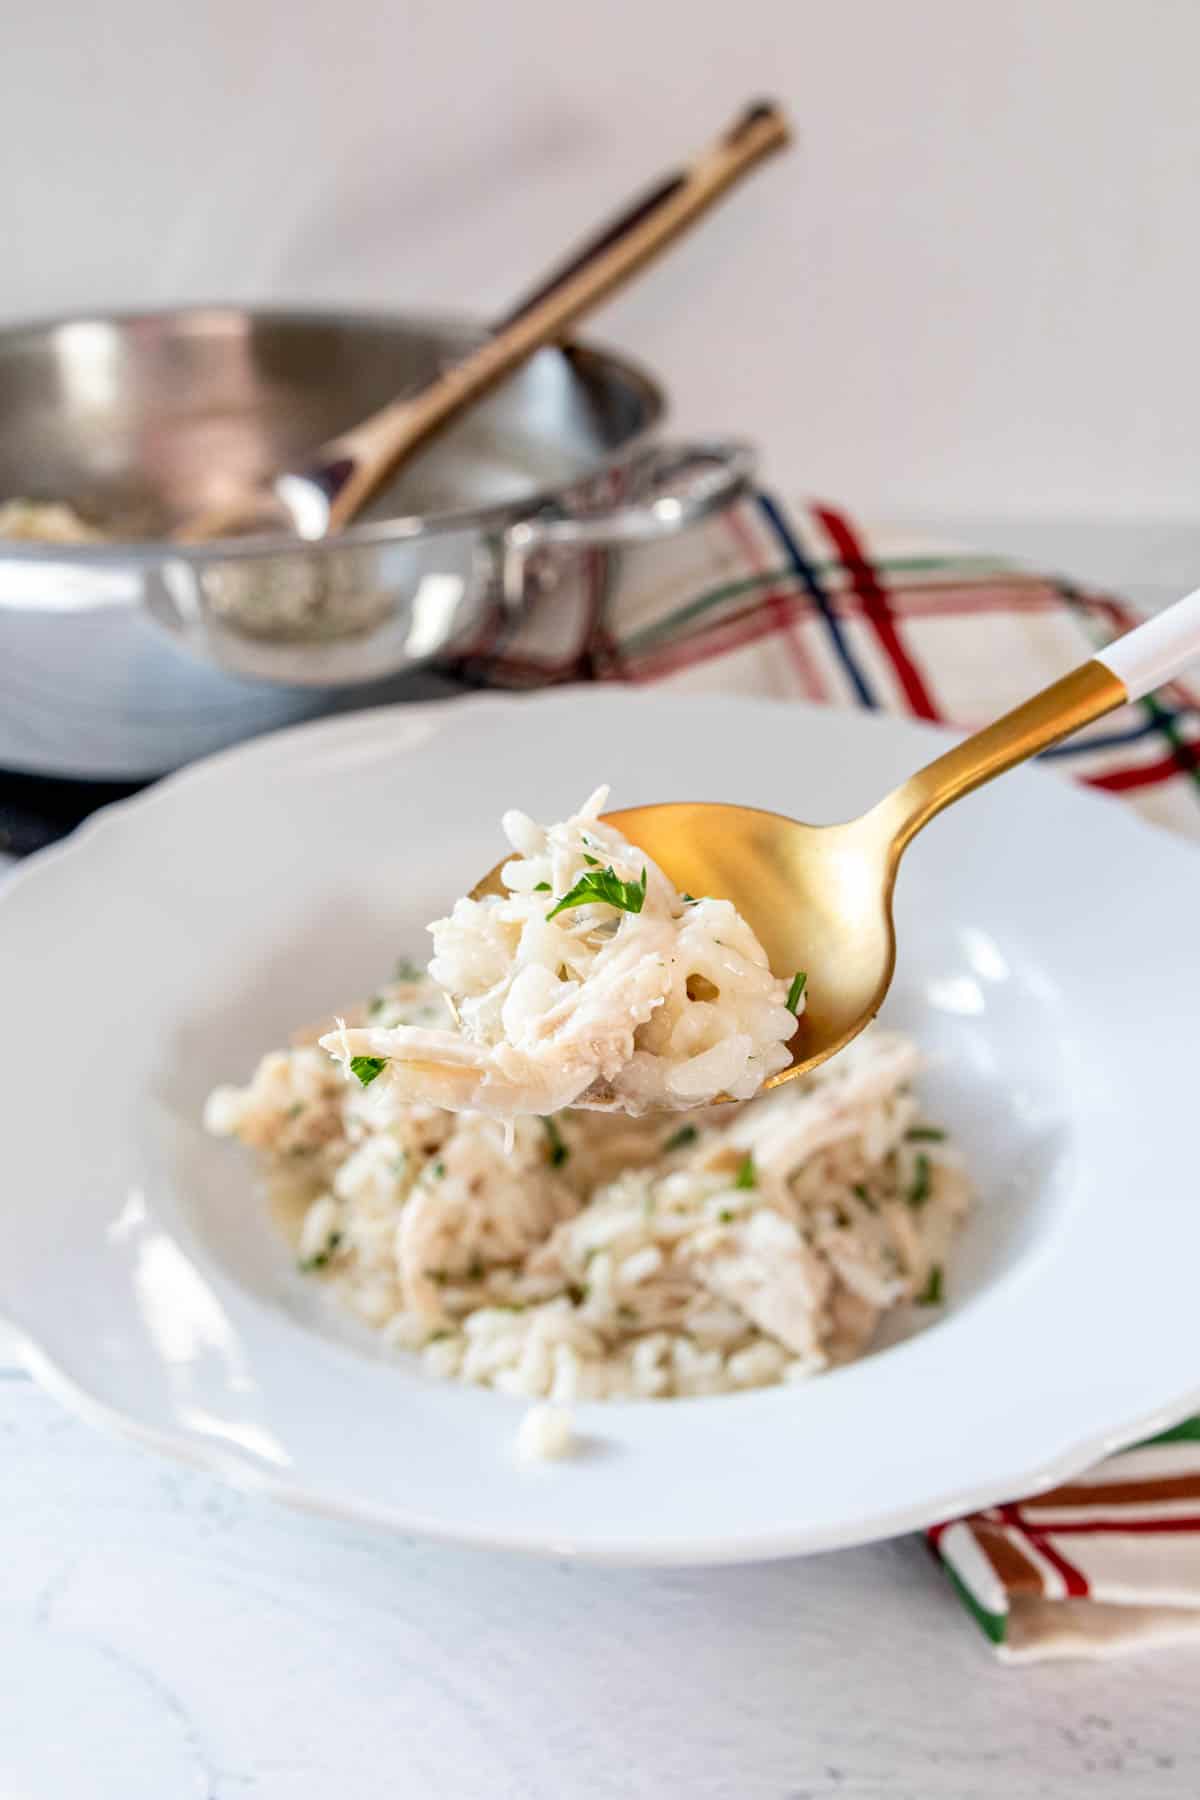 Spoonful of chicken risotto being held up above a bowl of risotto.